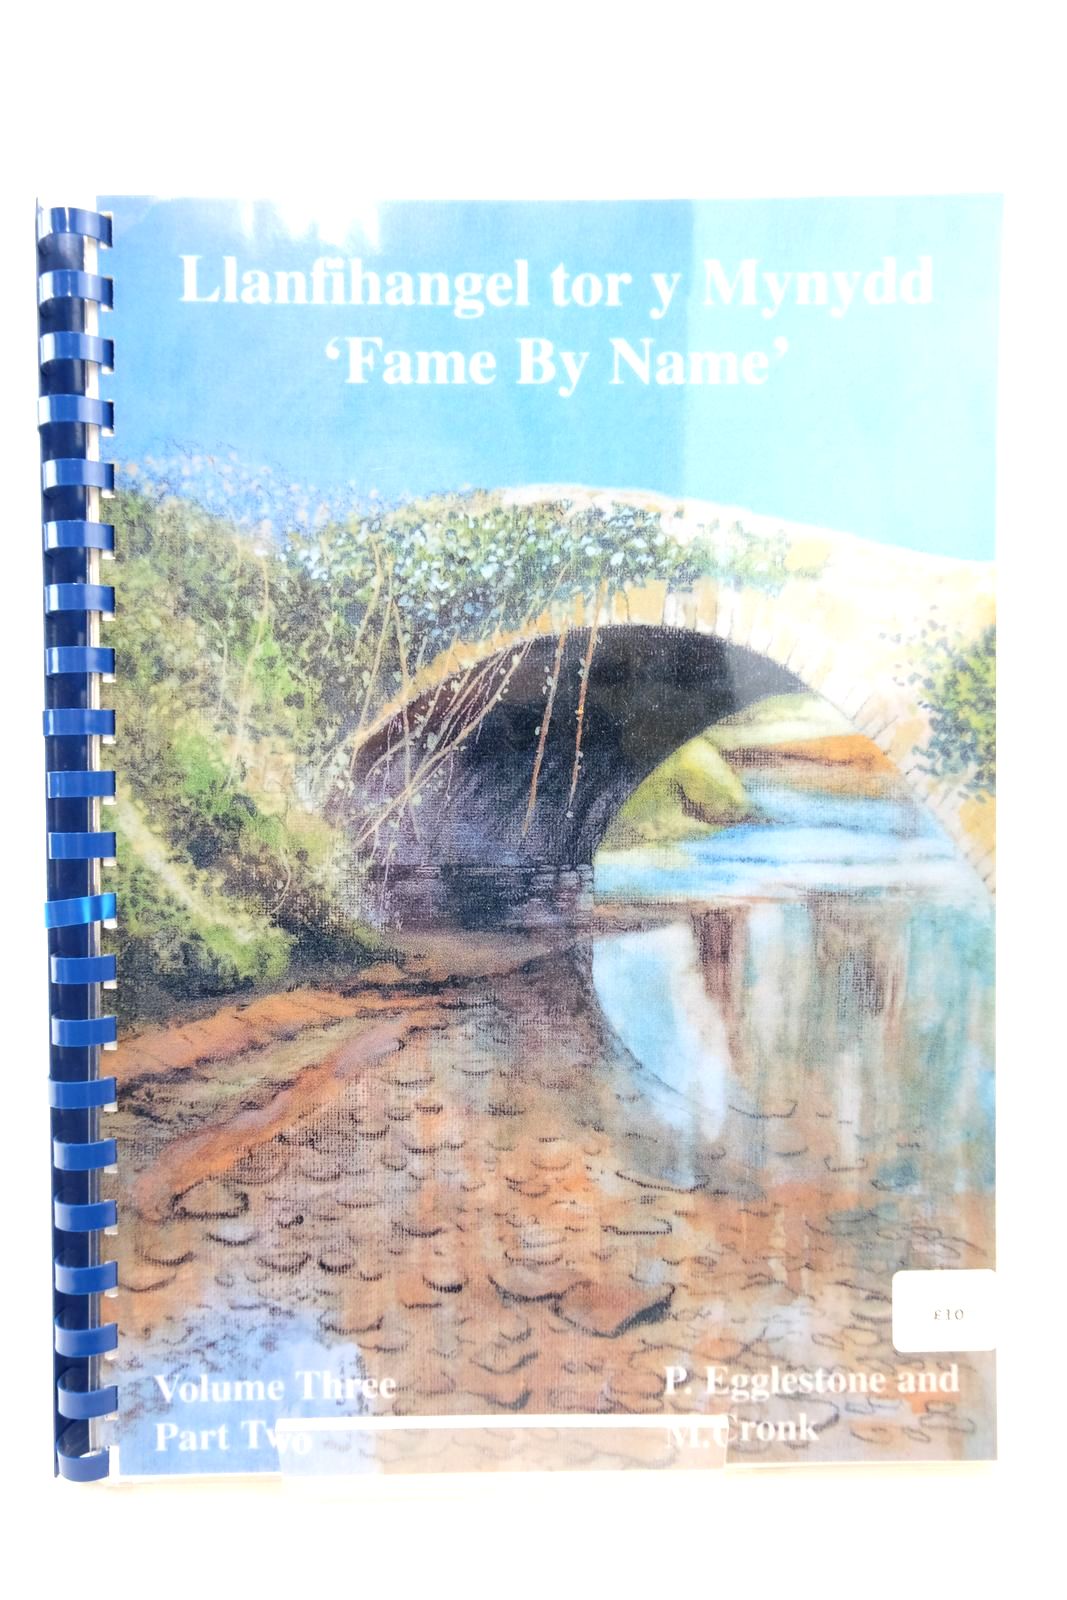 Photo of LLANFIHANGEL TOR Y MYNYDD - VOLUME THREE PART TWO  - FAME BY NAME written by Eggleston, Pat Cronk, Mark published by The Village News (STOCK CODE: 2140828)  for sale by Stella & Rose's Books